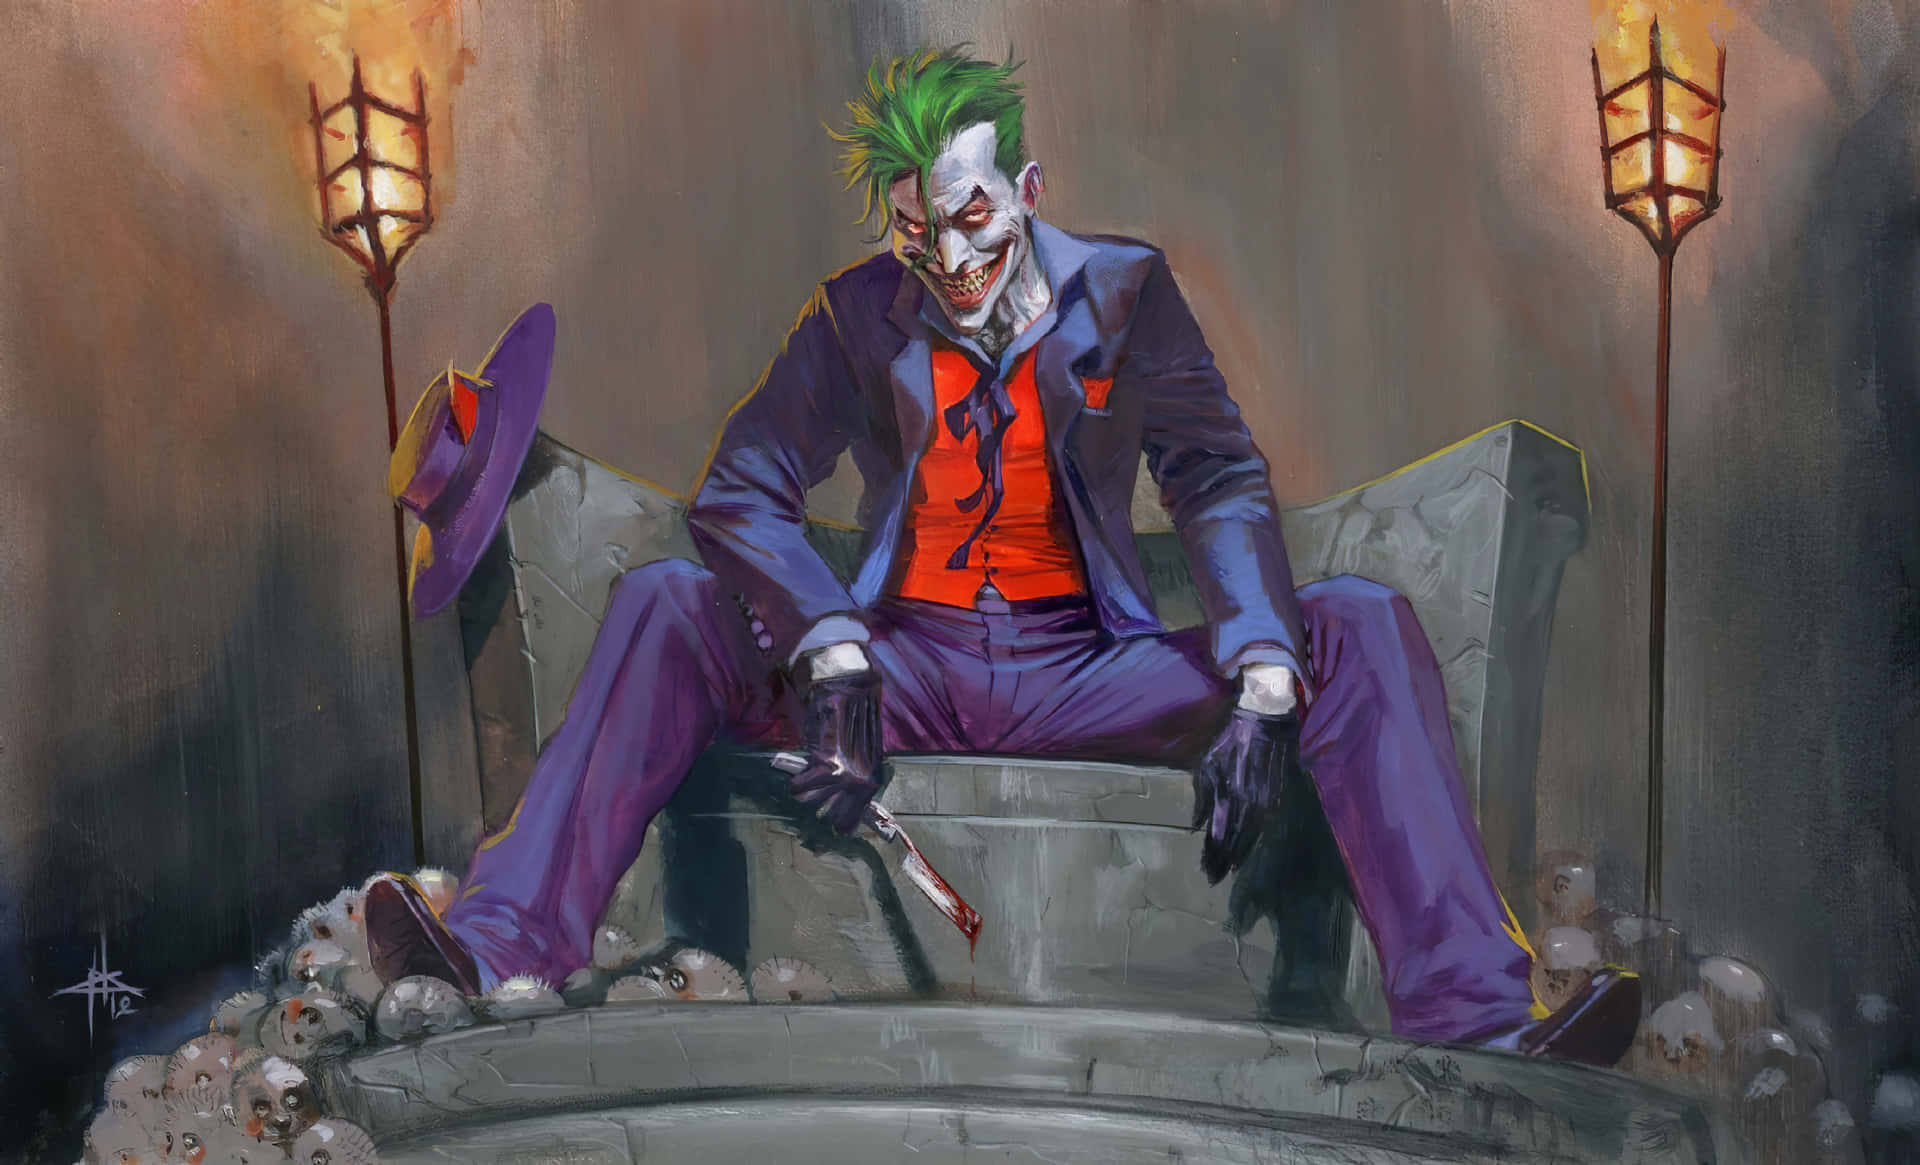 The Joker brings chaos and anarchy to the streets Wallpaper